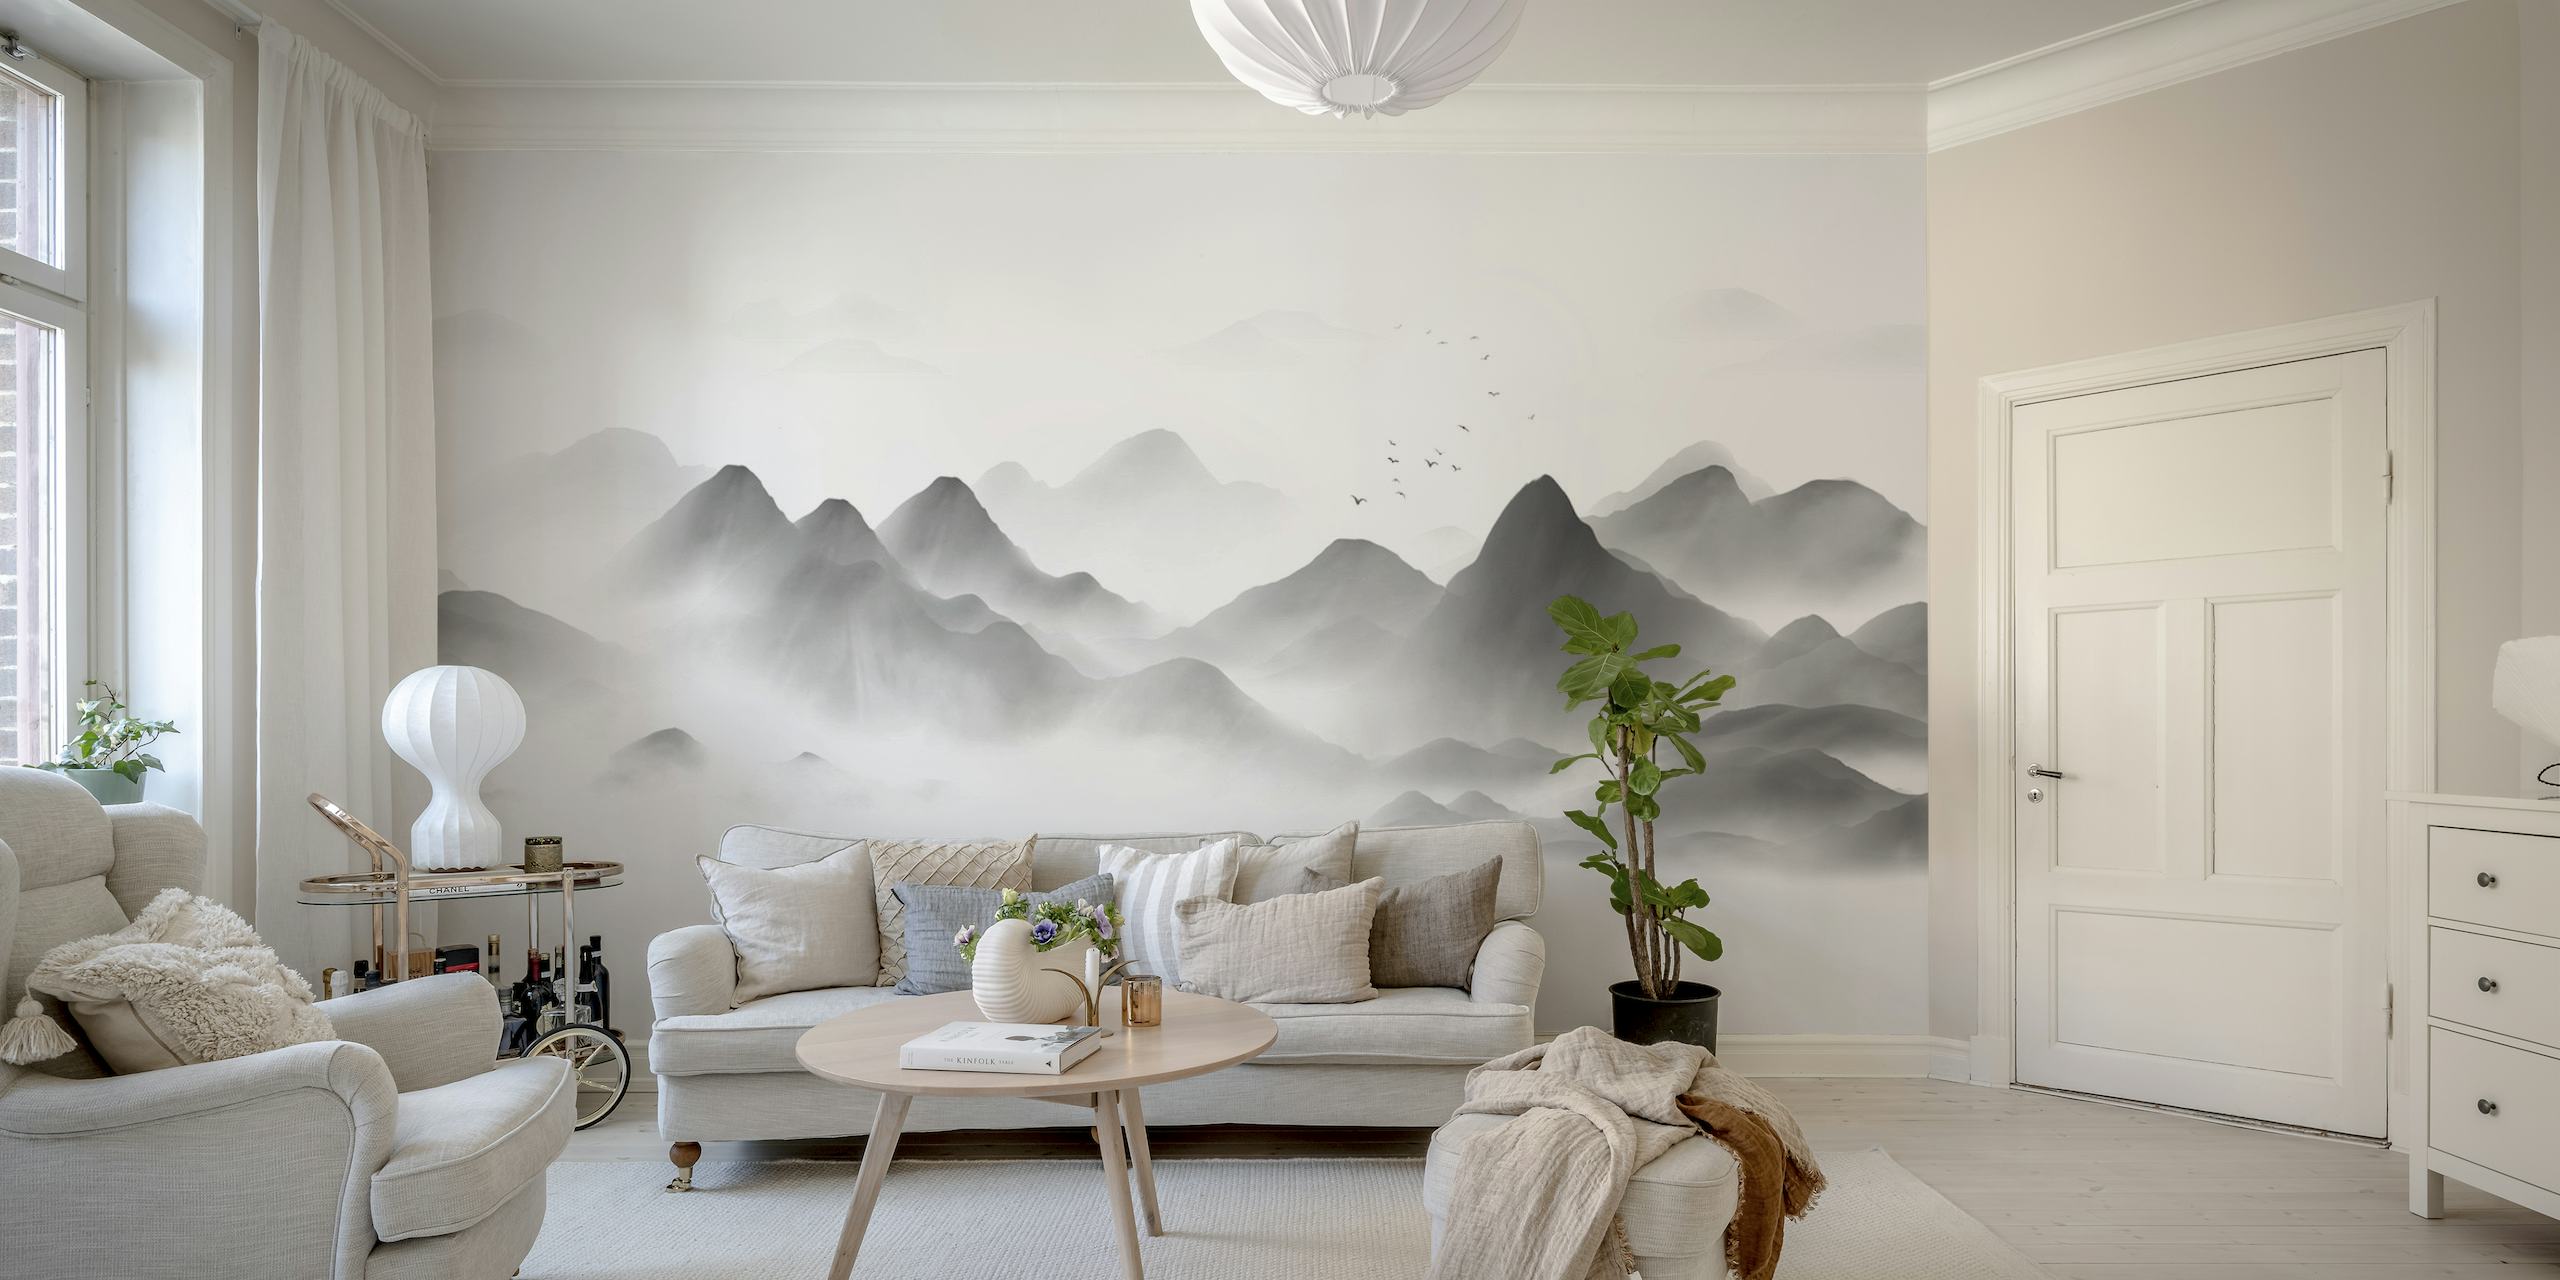 Chinsese style landscape behang